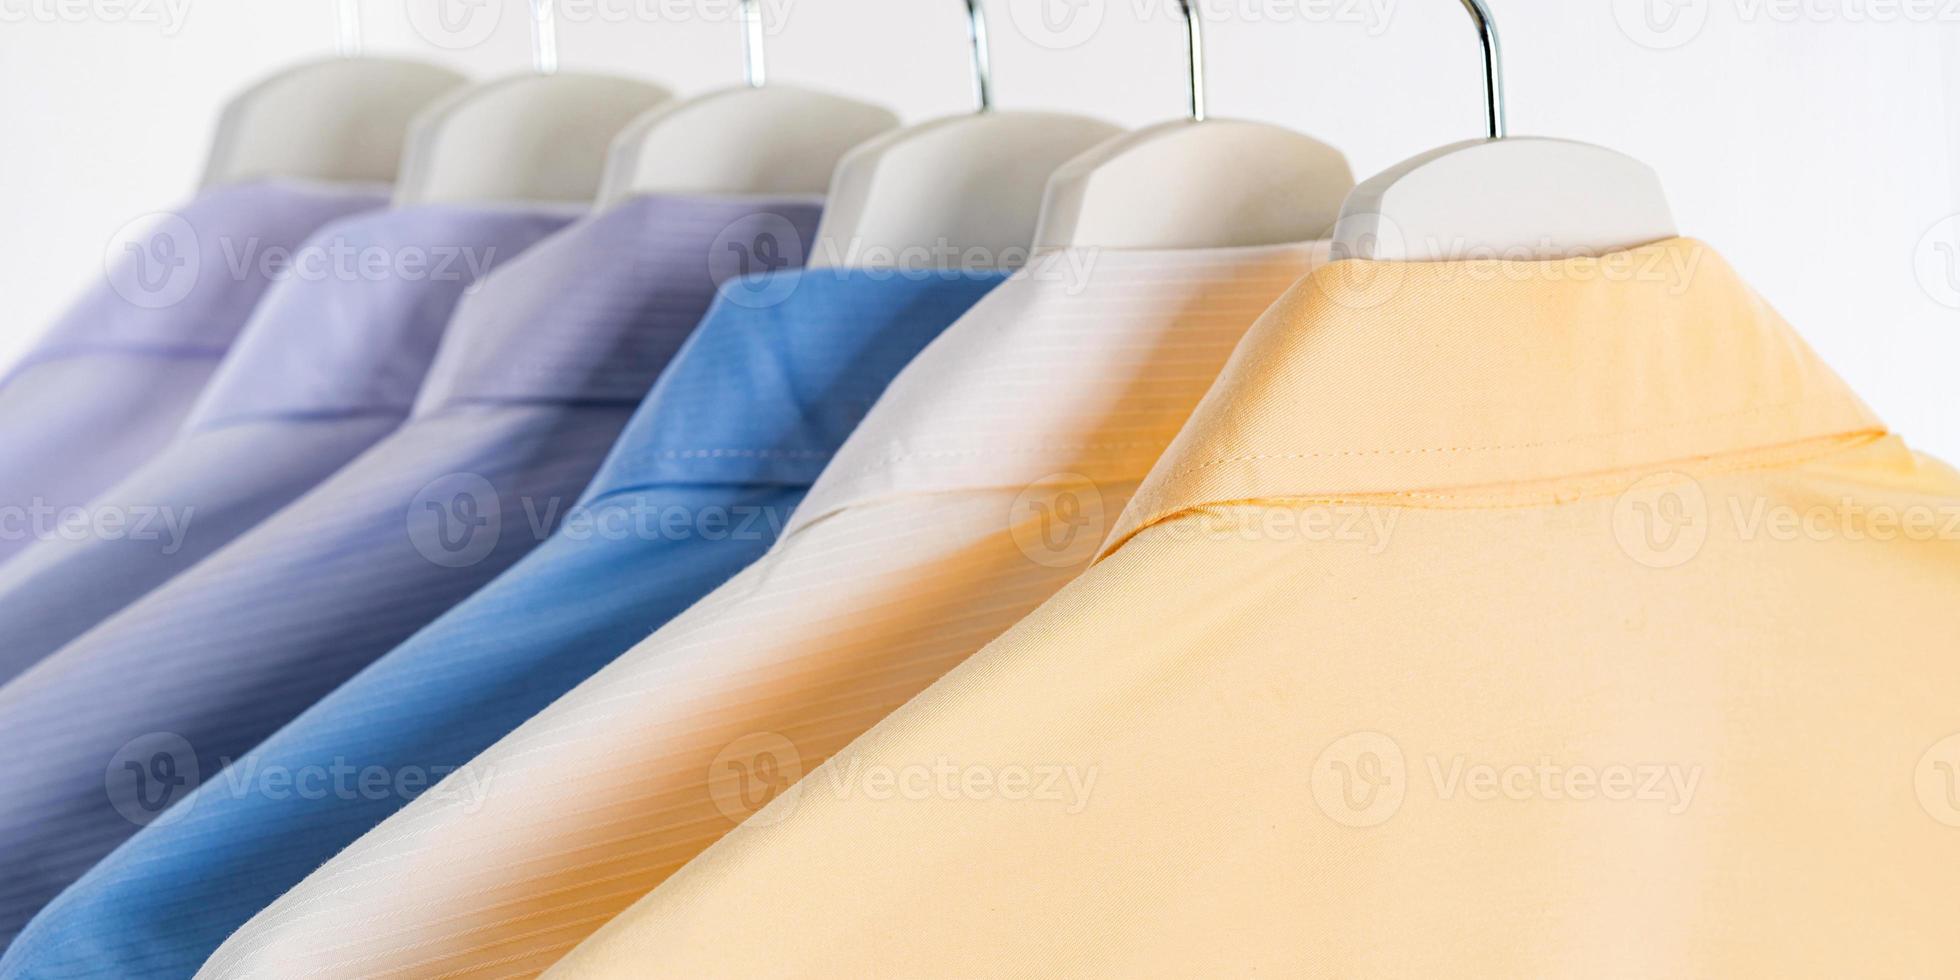 Men's dress shirts, Clothes on hangers on white background photo